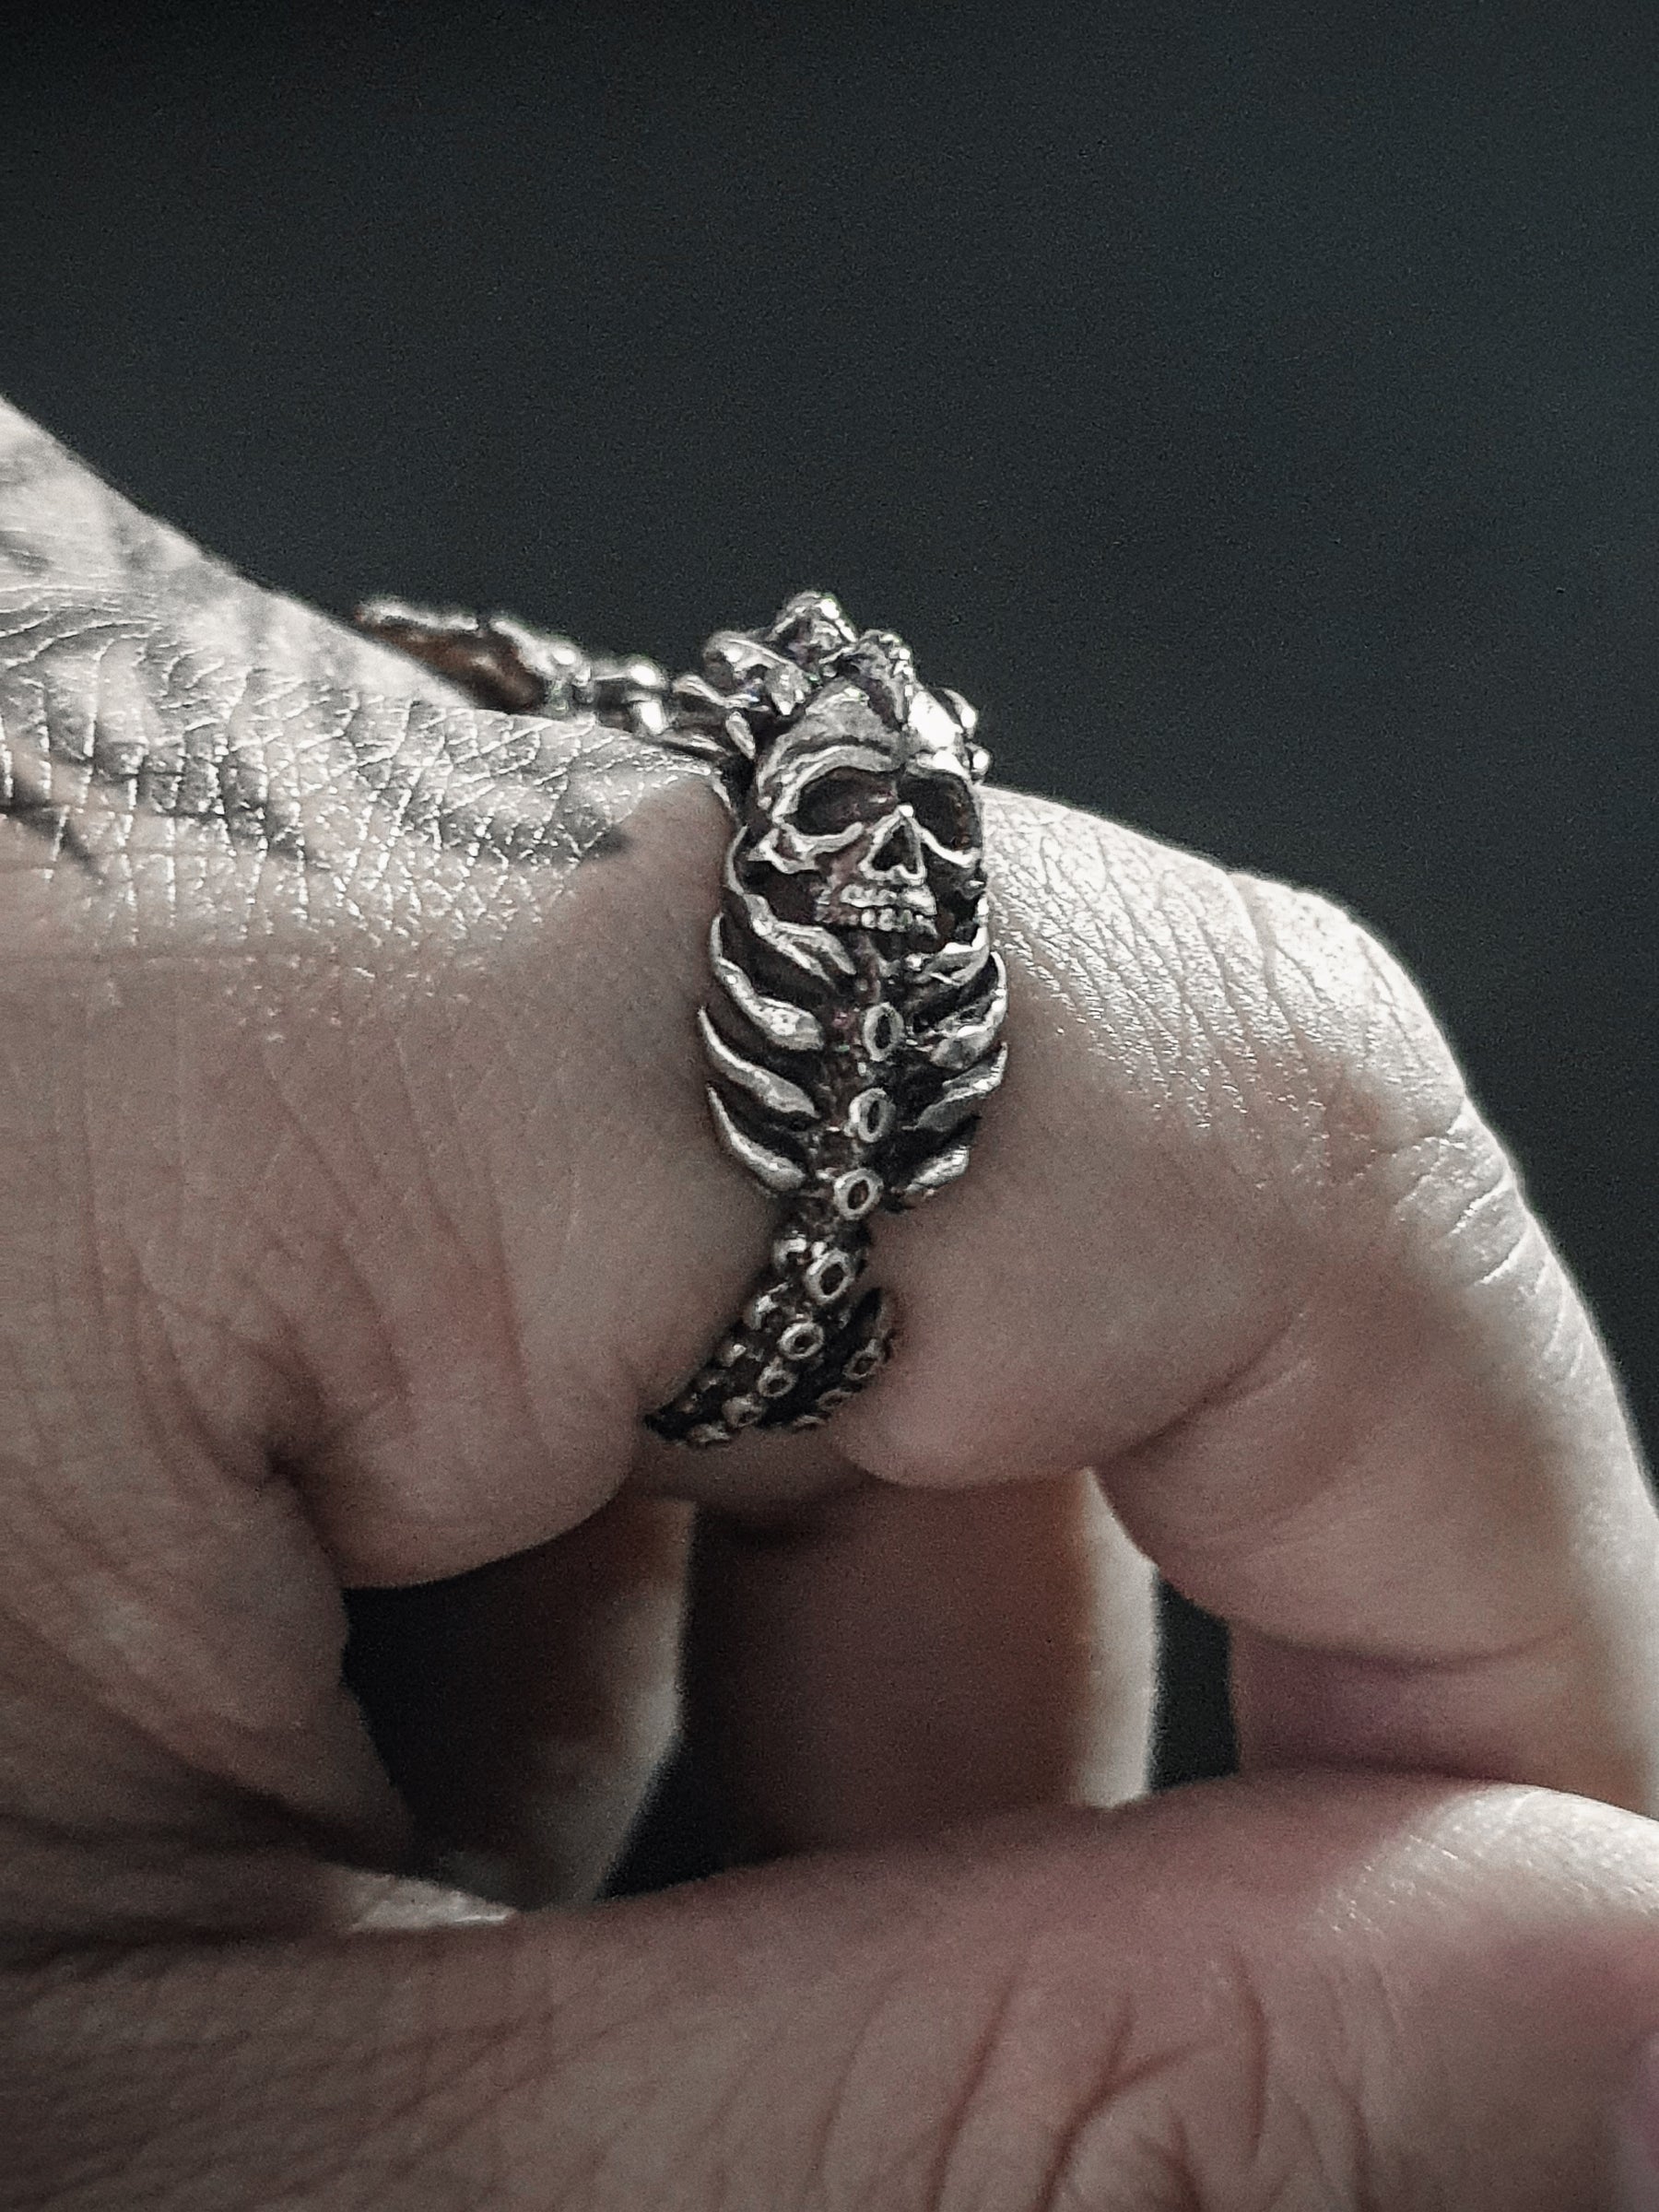 Skull Ring | Gothic Twin Skull Head Adjustable Ring with Ribcage